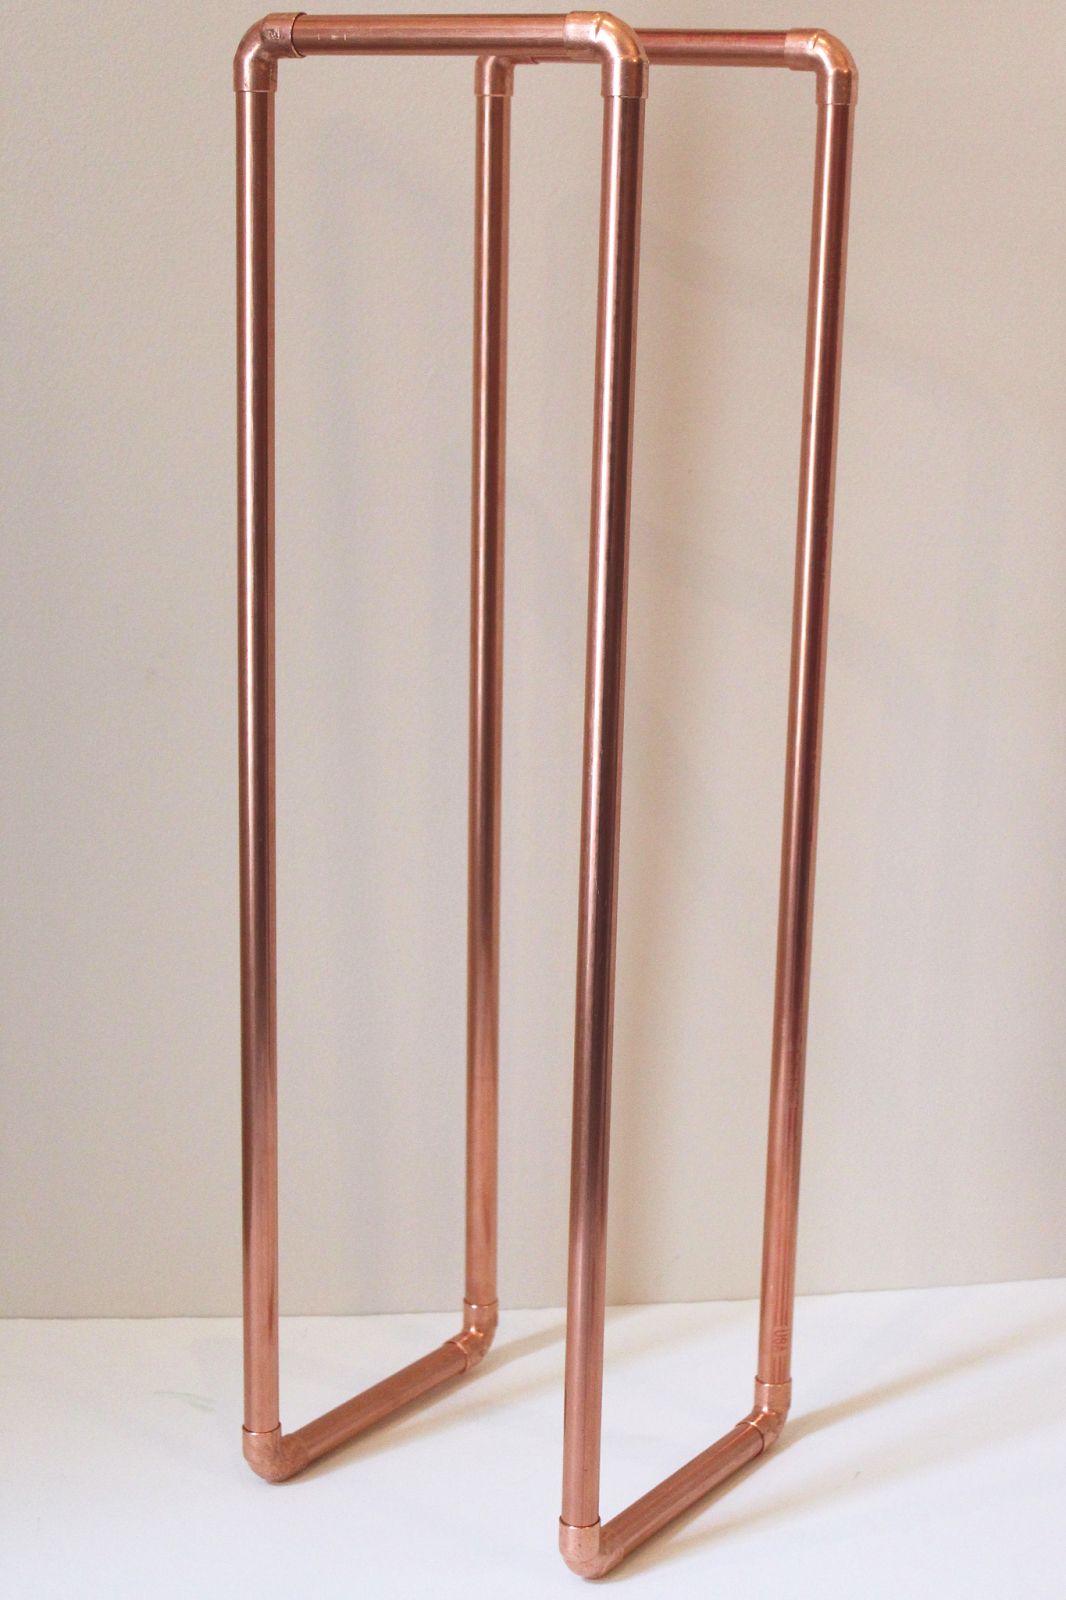 Copper Leg Plant Stand | Sarah & Nick With Regard To Copper Plant Stands (View 11 of 15)